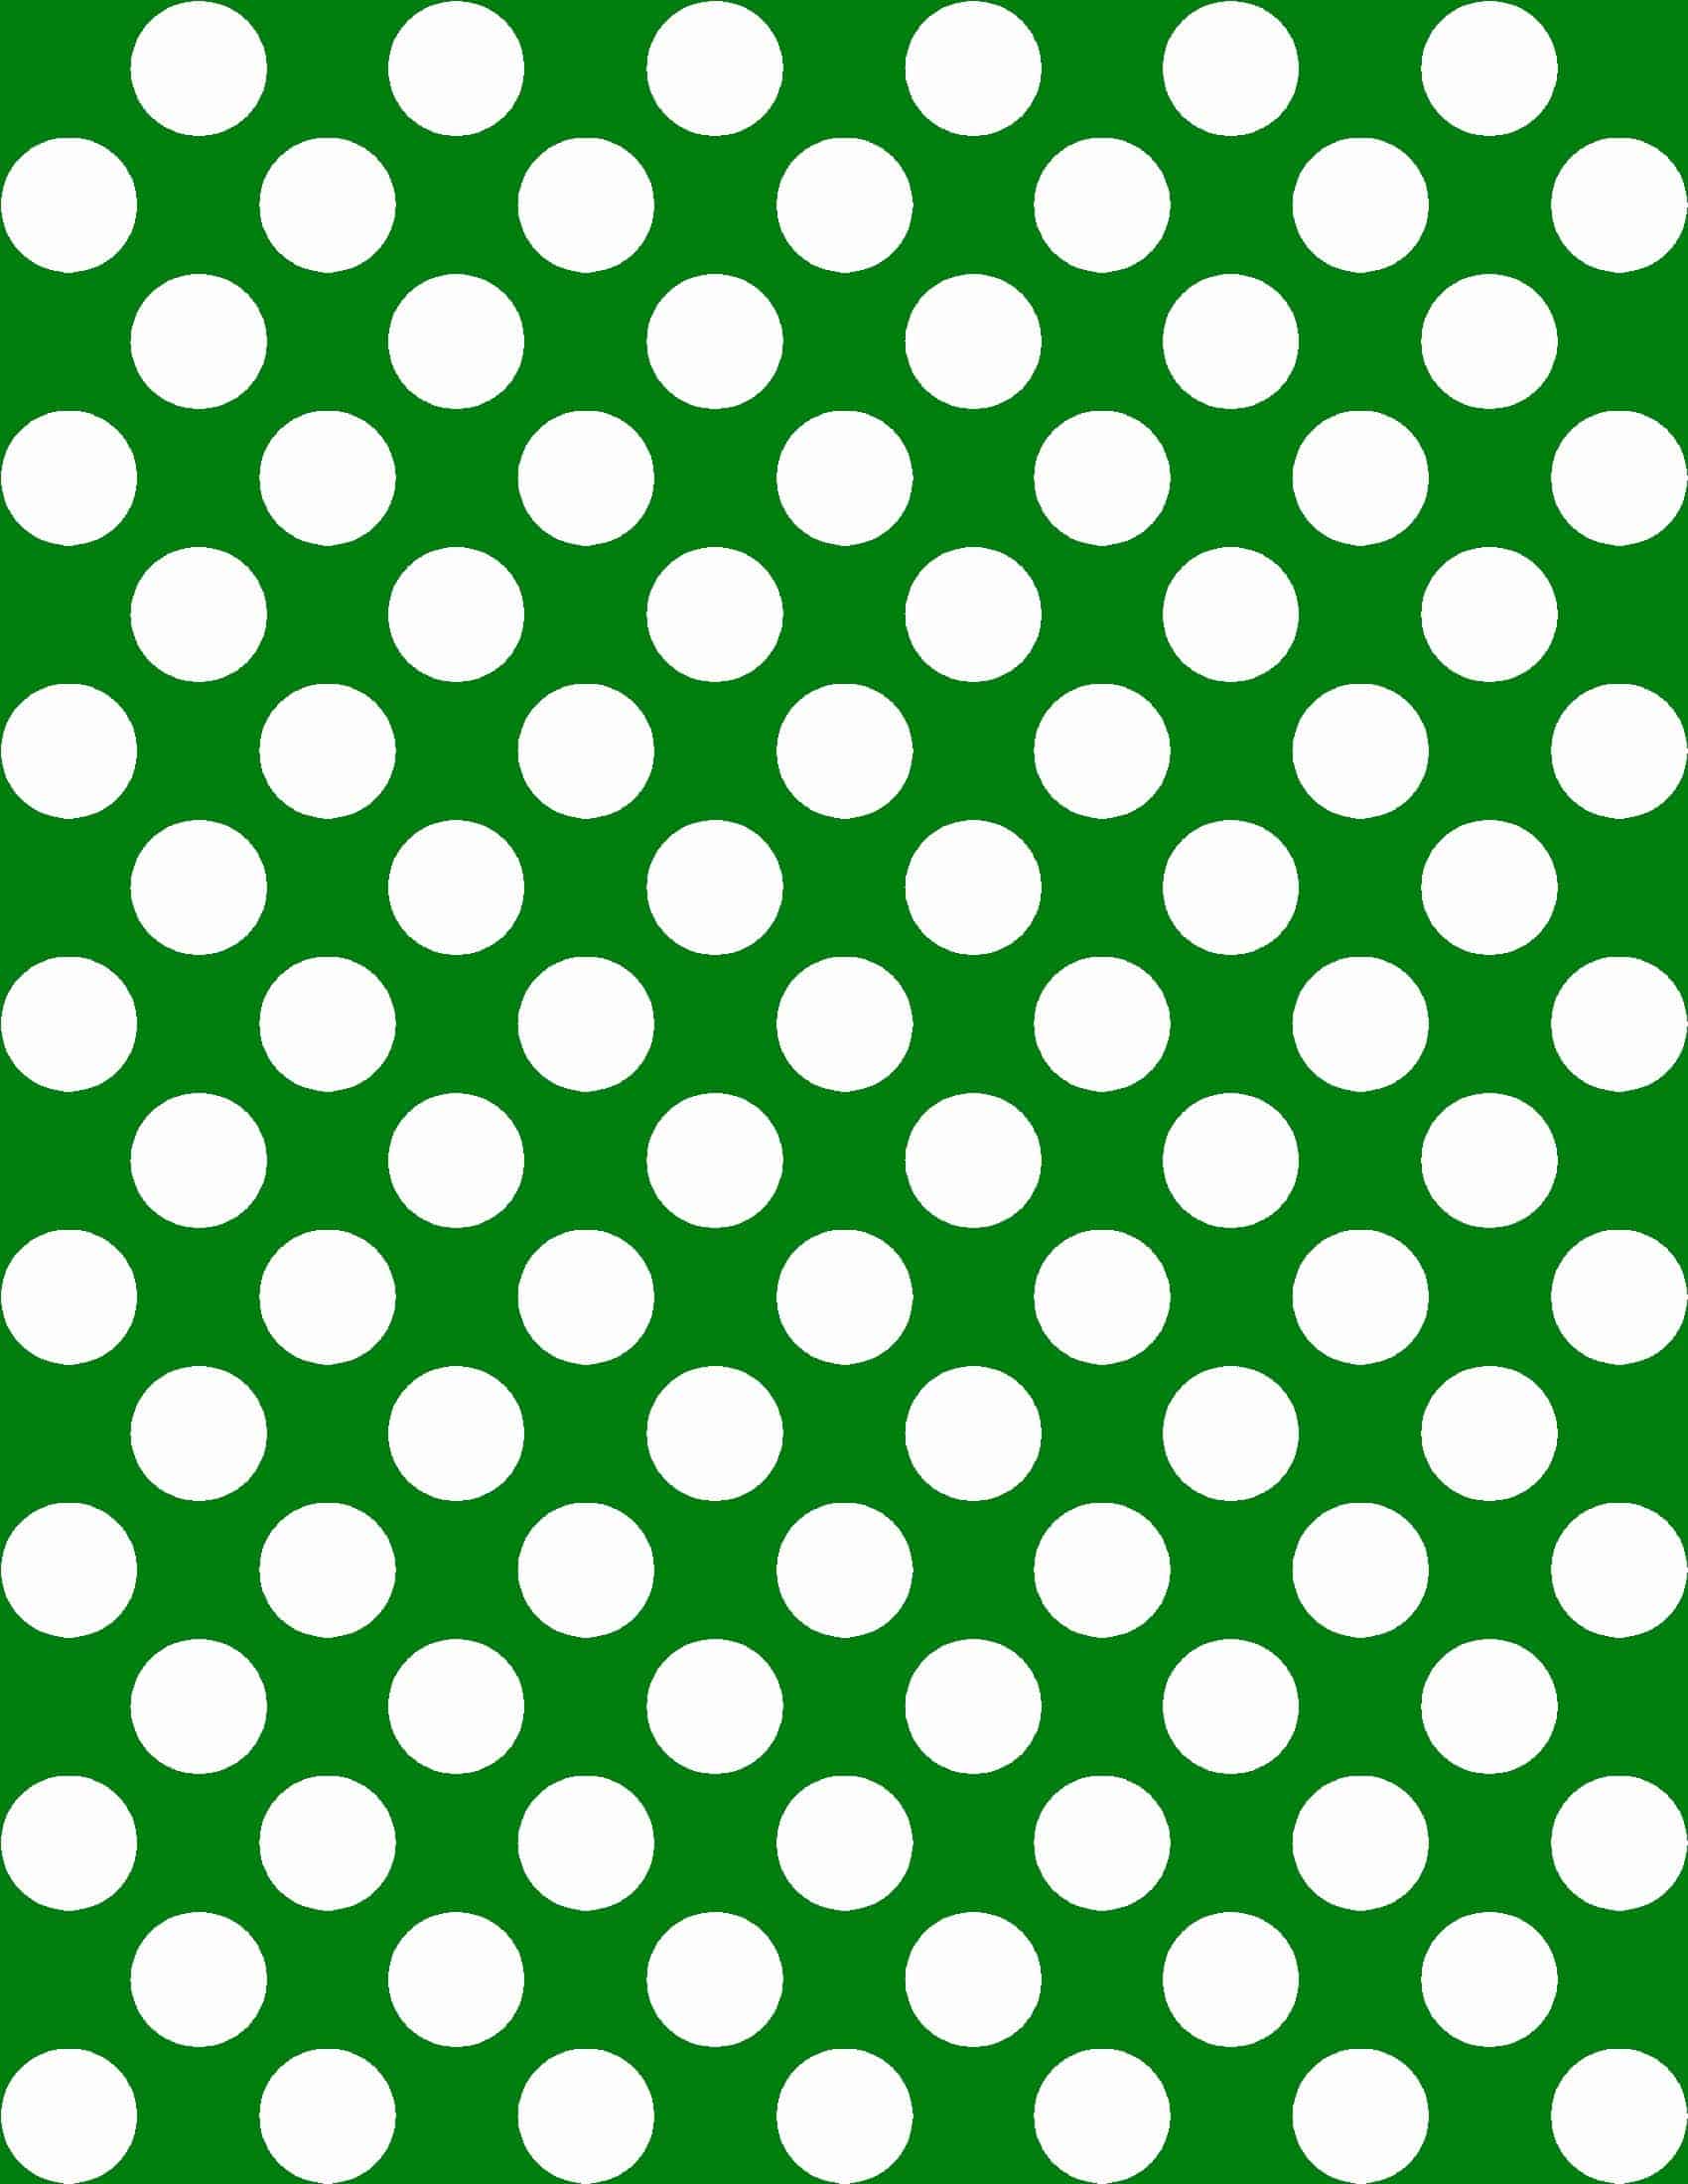 Free Polka Dot Background in Any Color